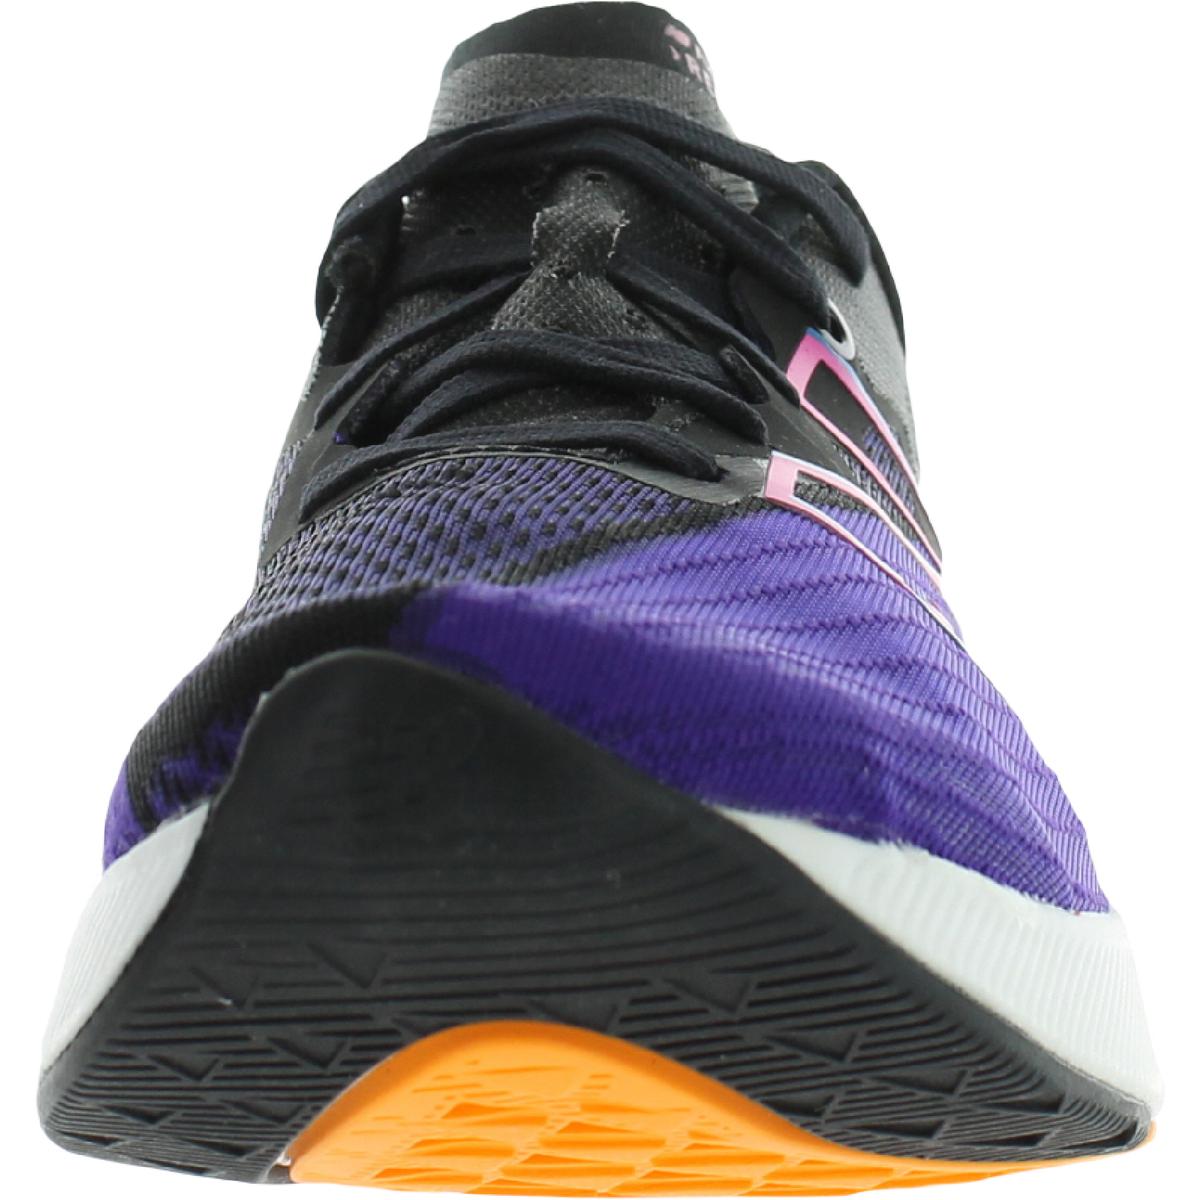 New Balance Fuel Cell Rebel Womens Fitness Gym Running Shoes